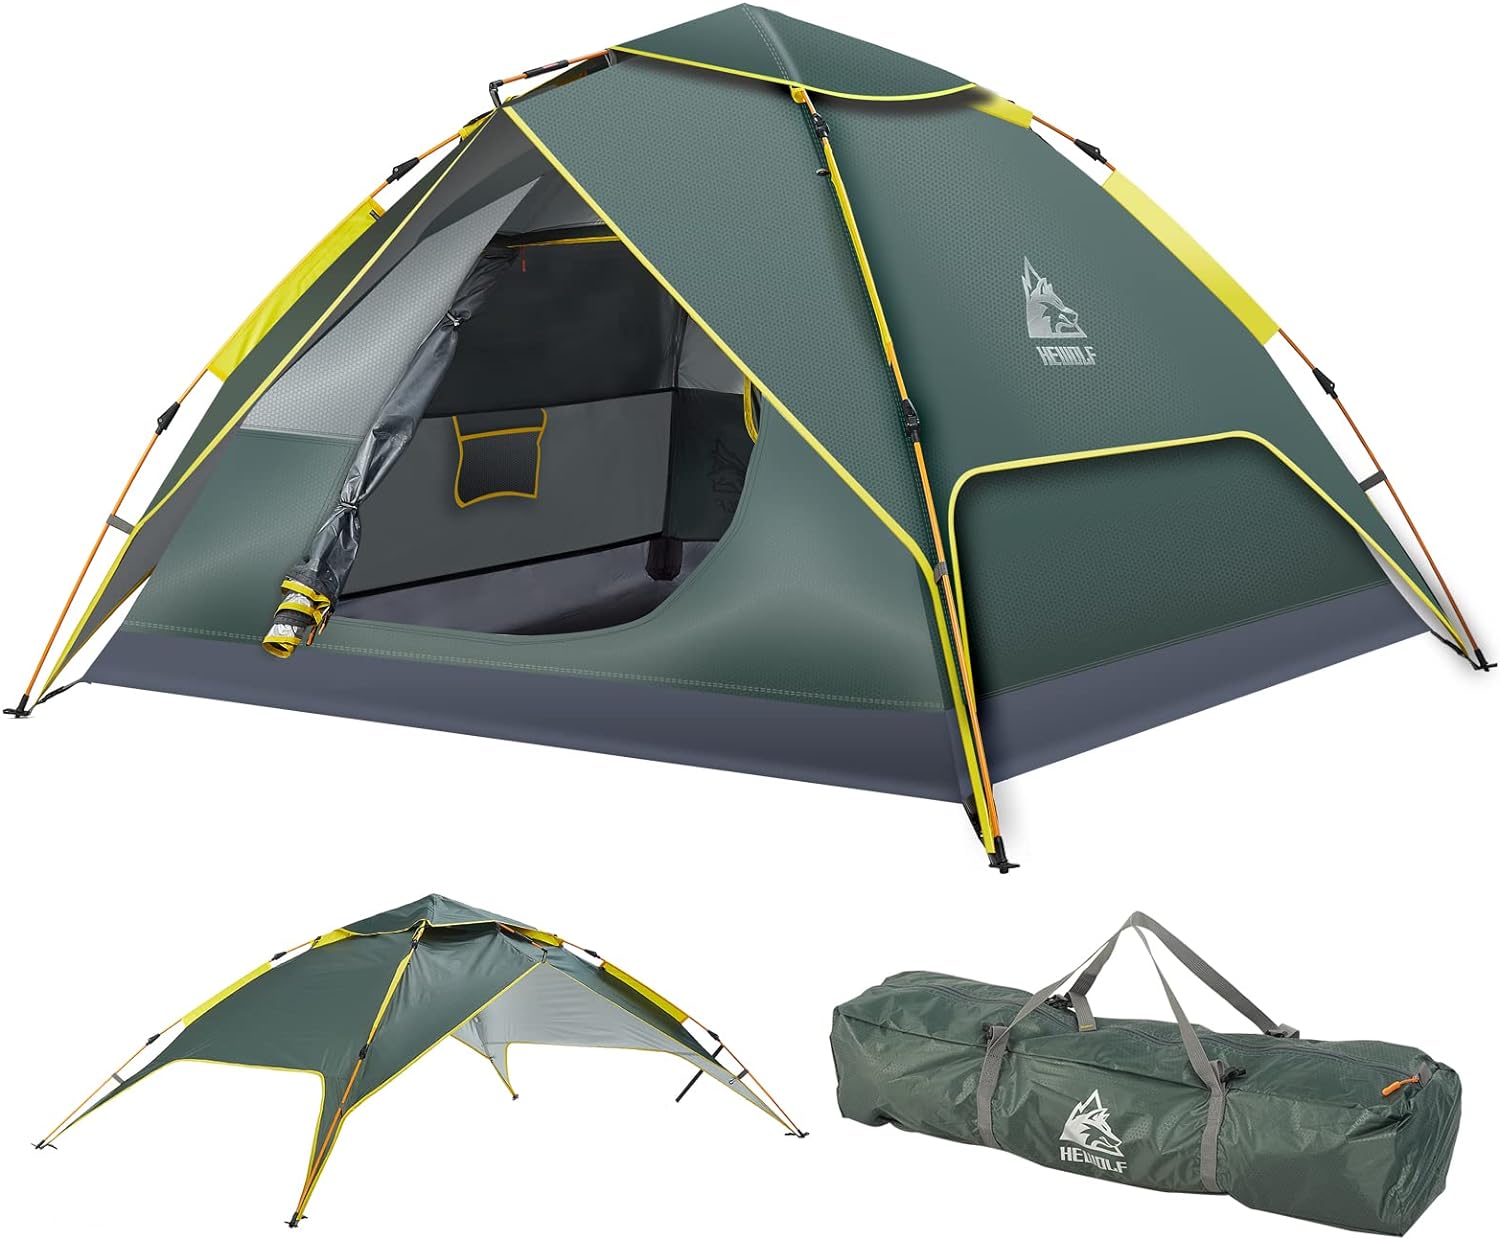 Top Camping Tents for Outdoor Enthusiasts – Roundup Review